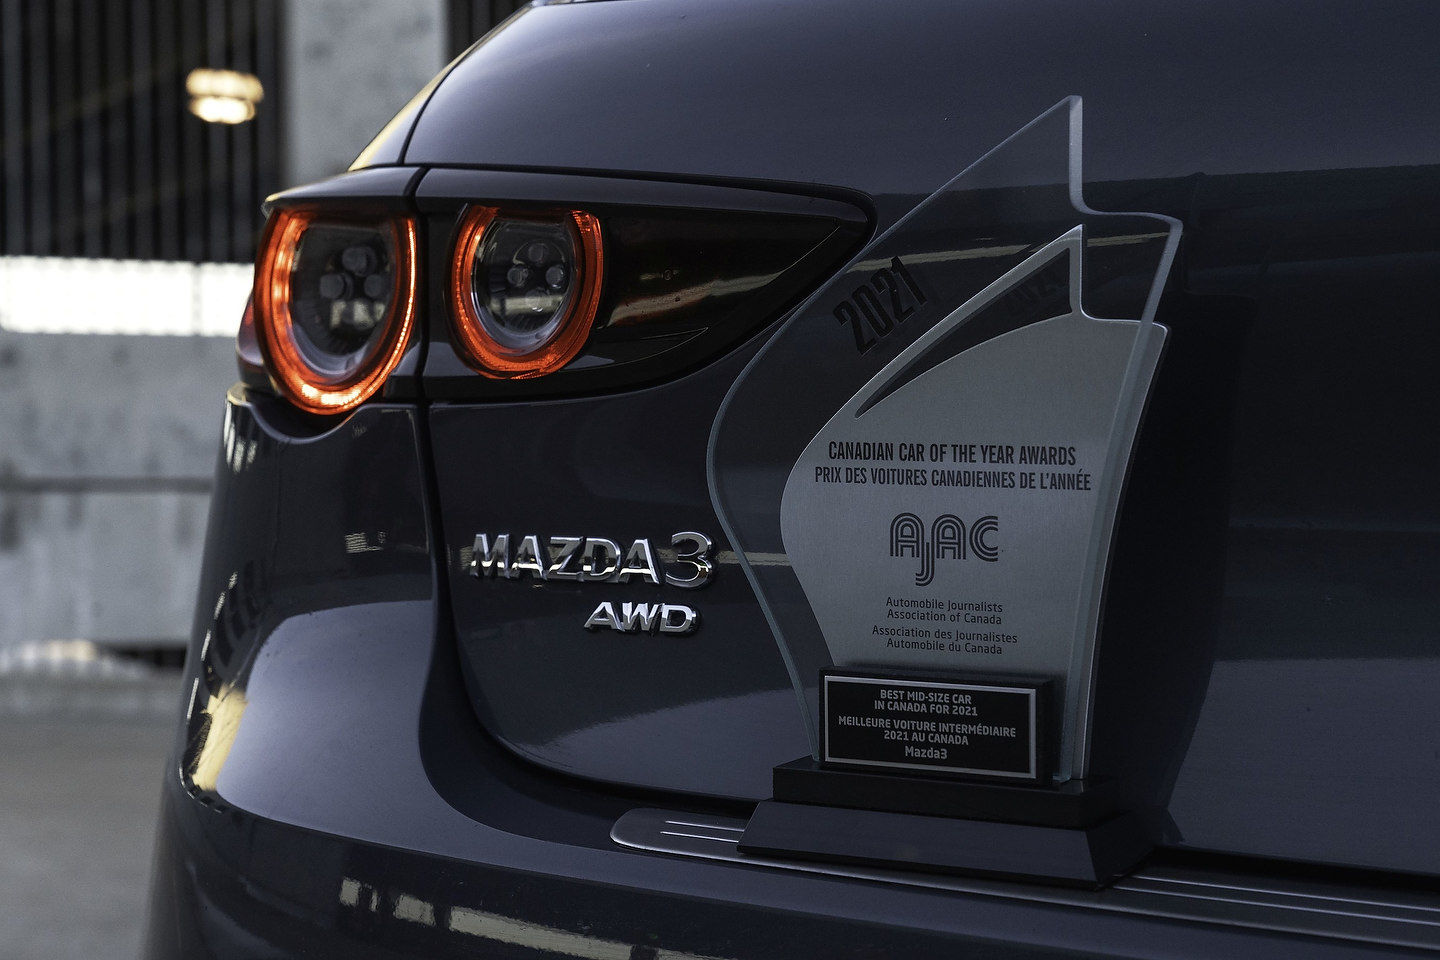 Mazda3 Wins Best in Class Award from AJAC